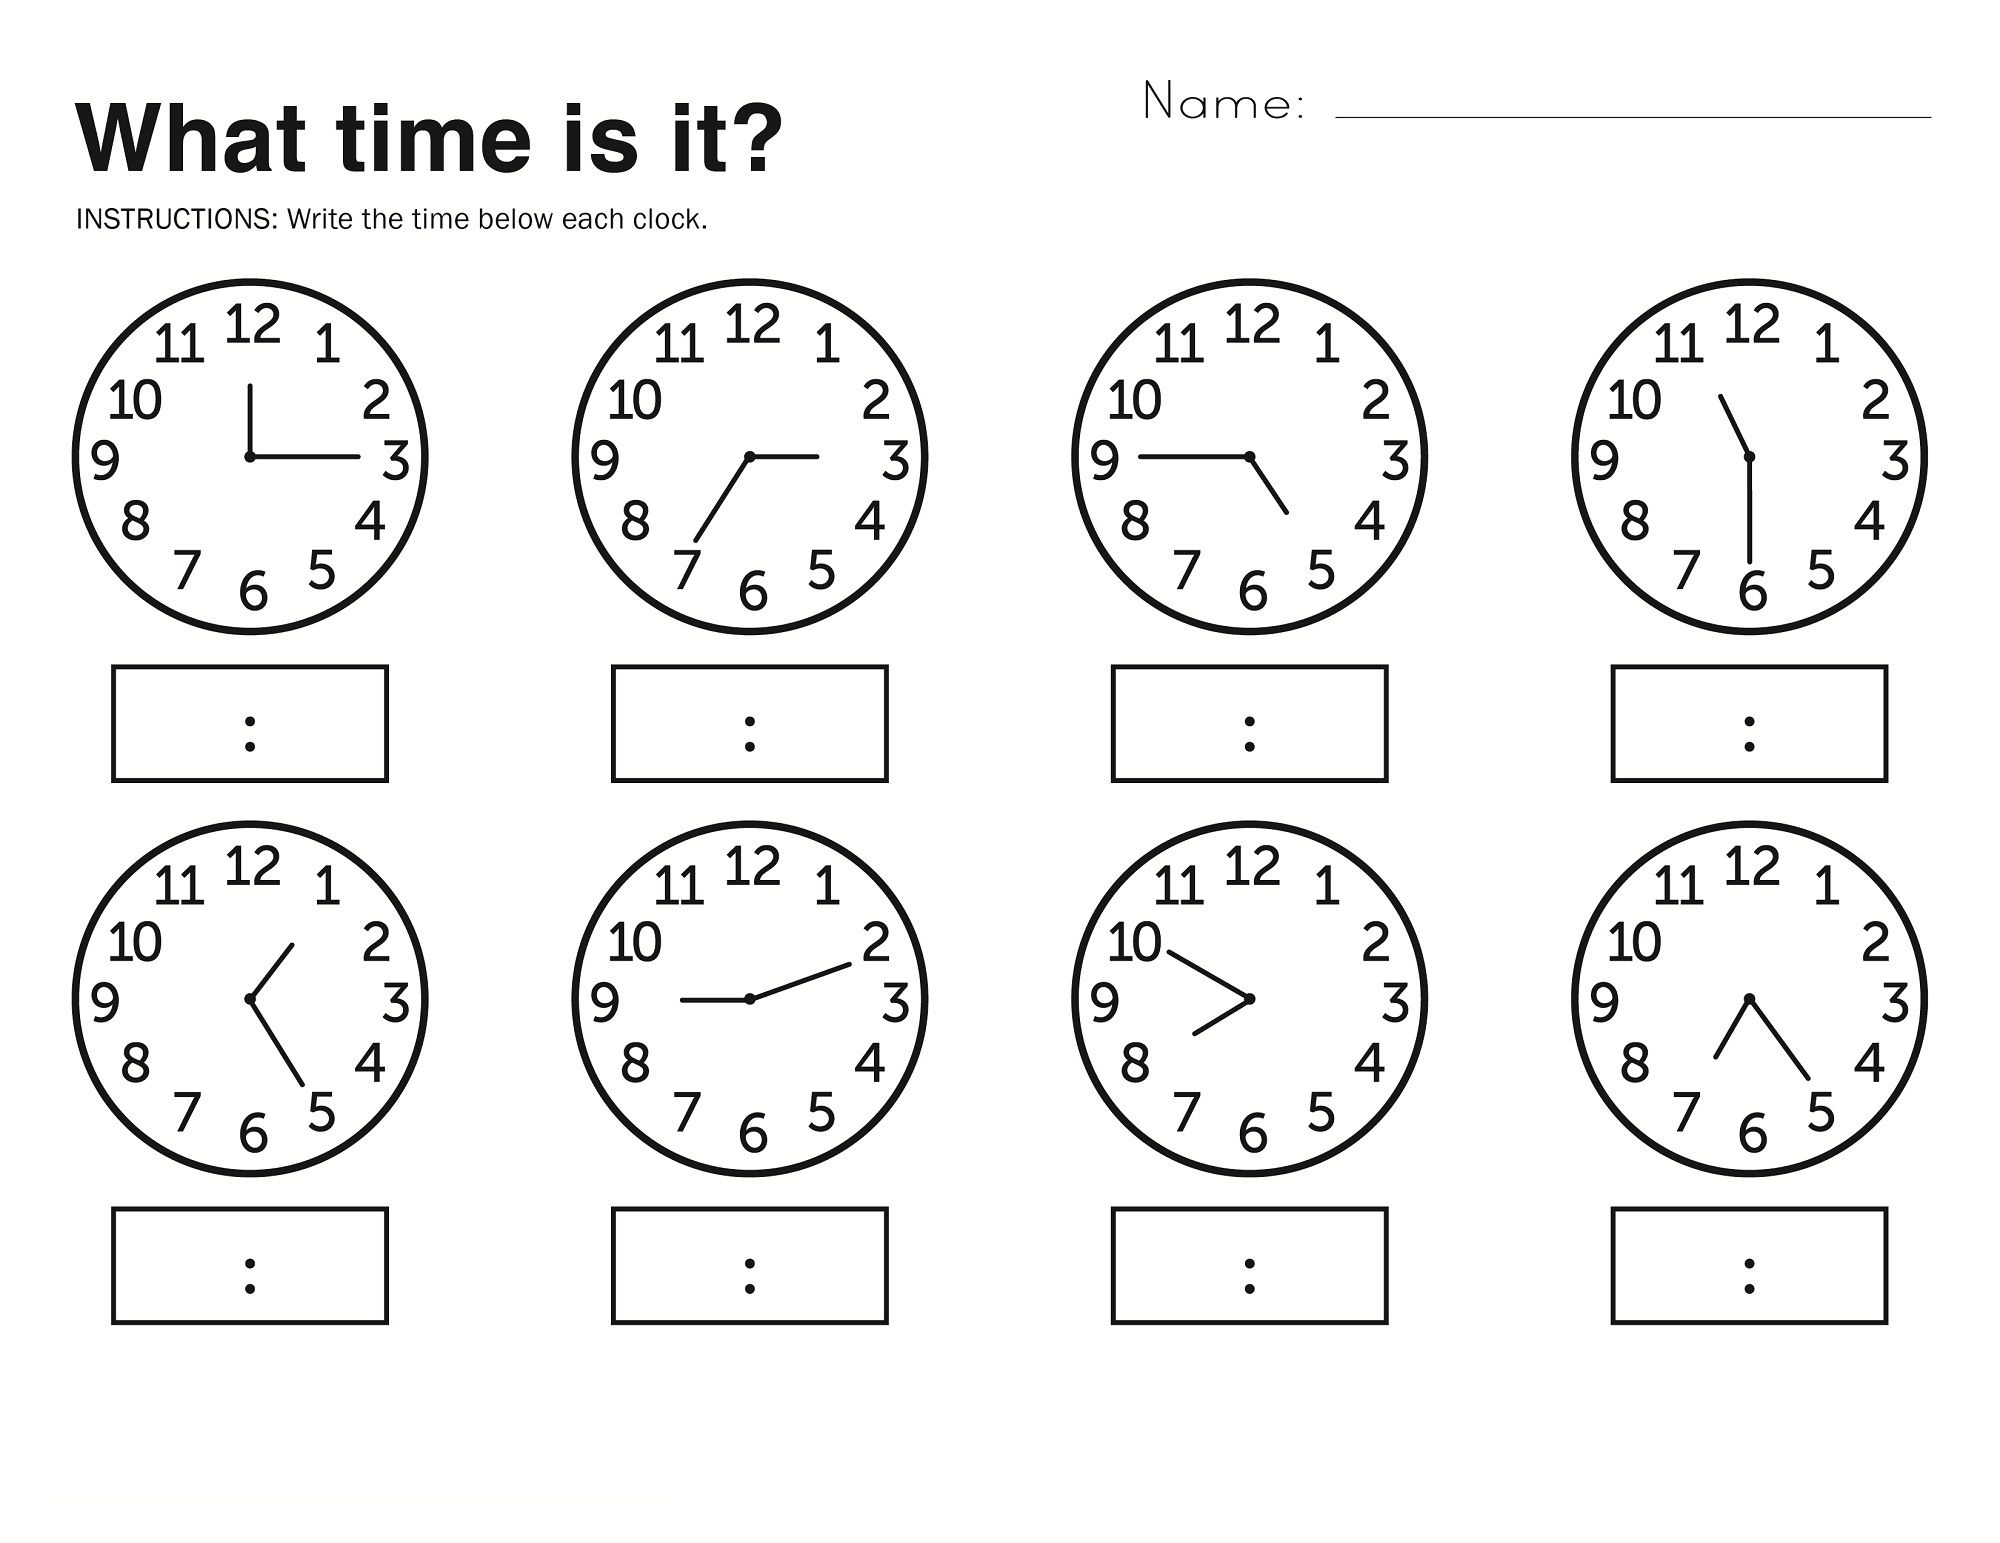 Time Elapsed Worksheets To Print | Kids Worksheets Printable | Learn To Tell The Time Printable Worksheets